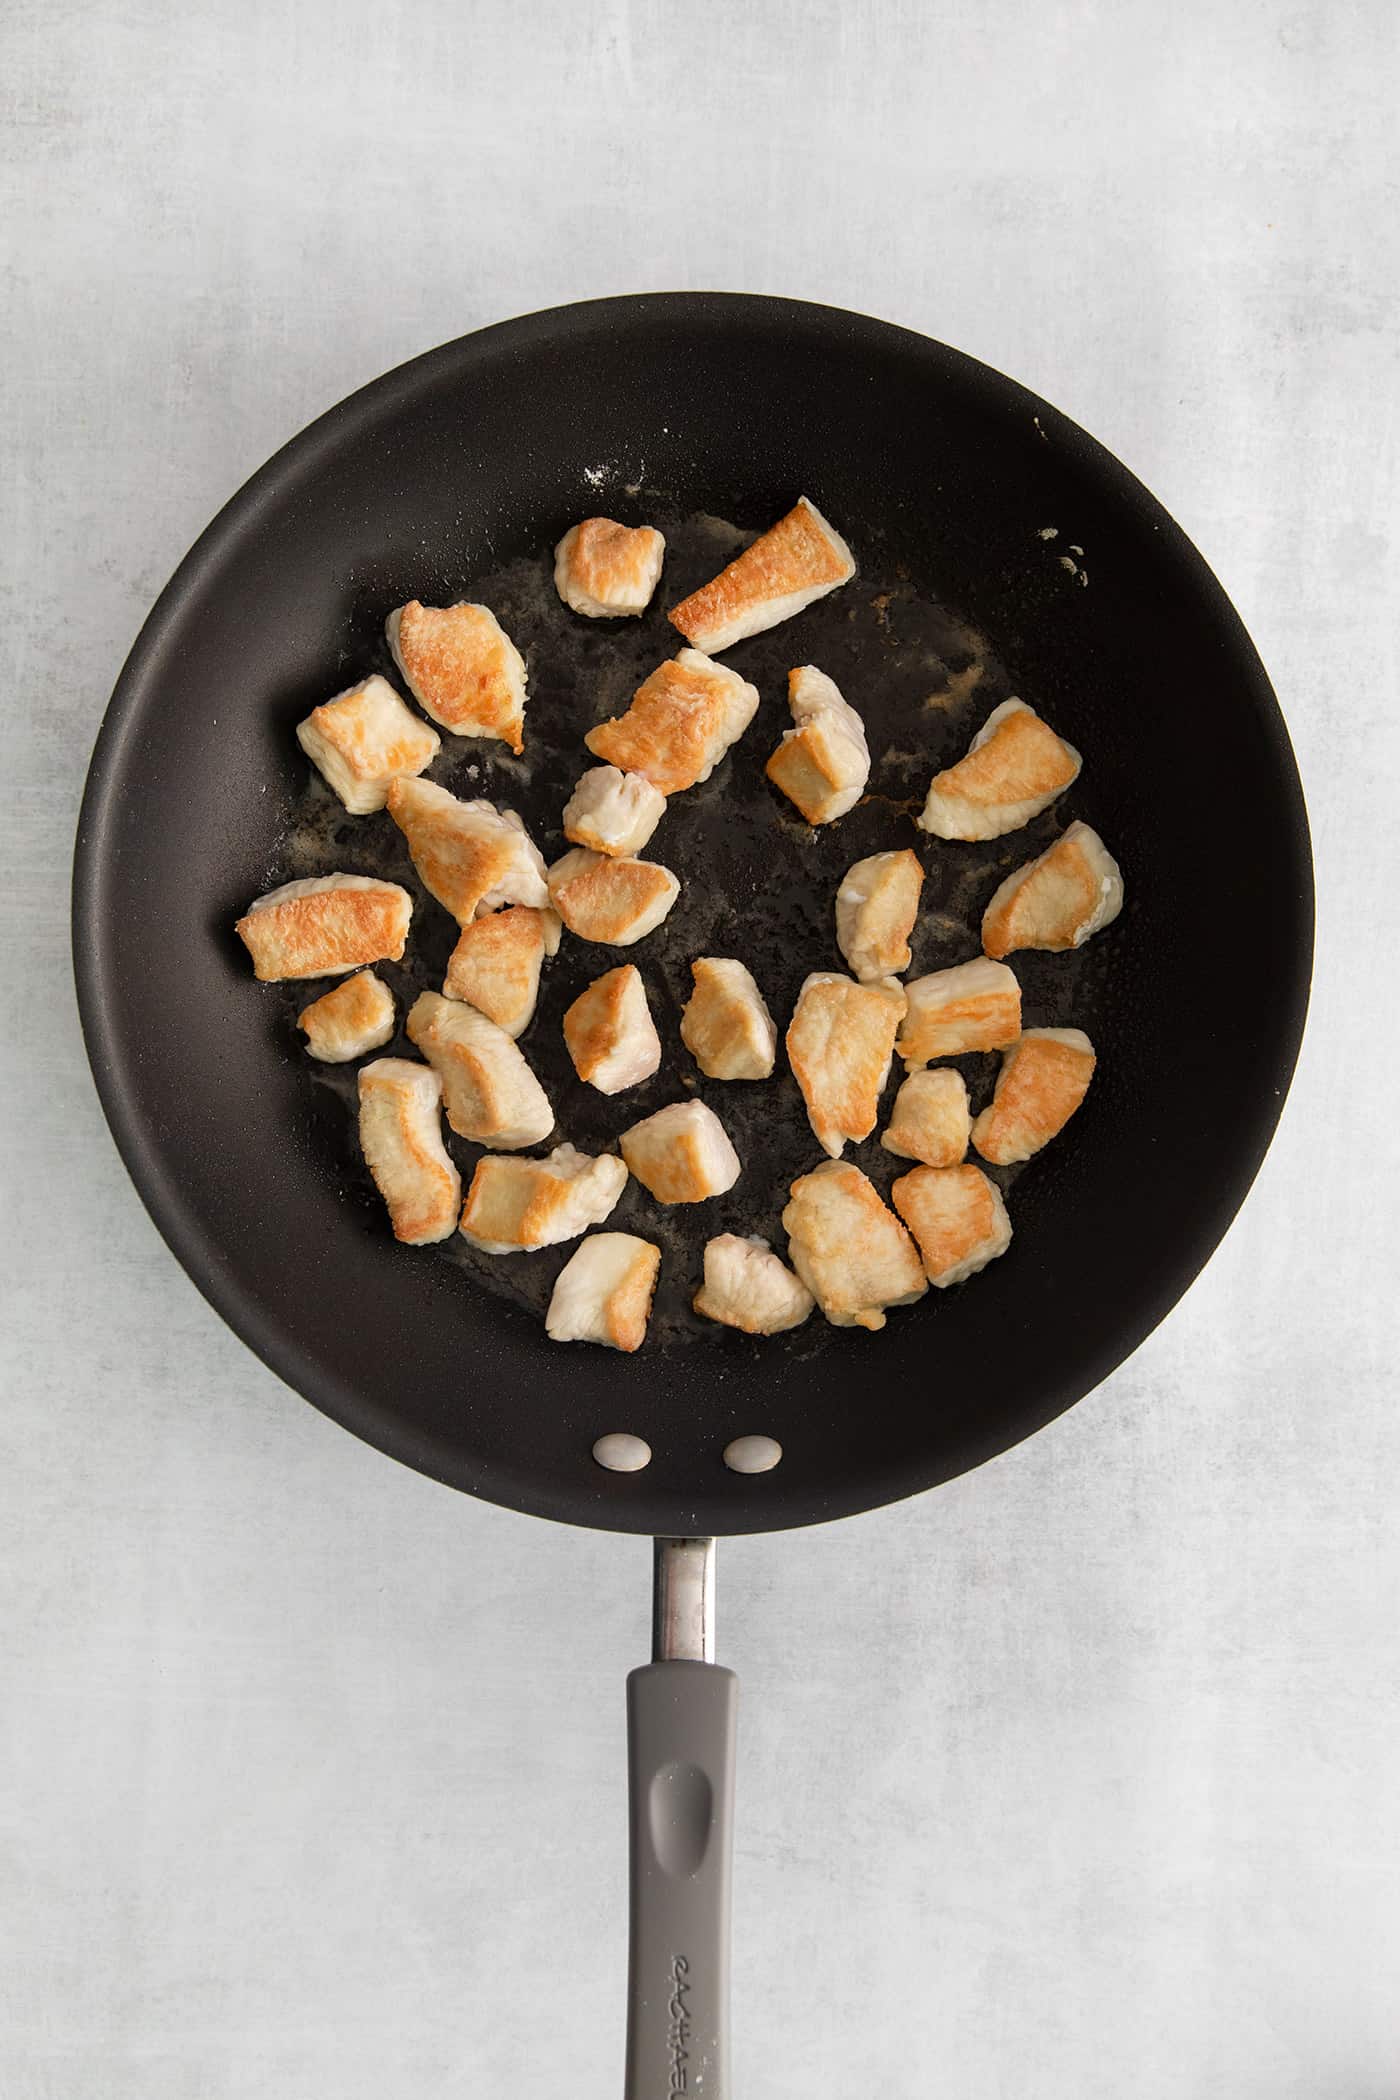 Pieces of seared chicken in a skillet